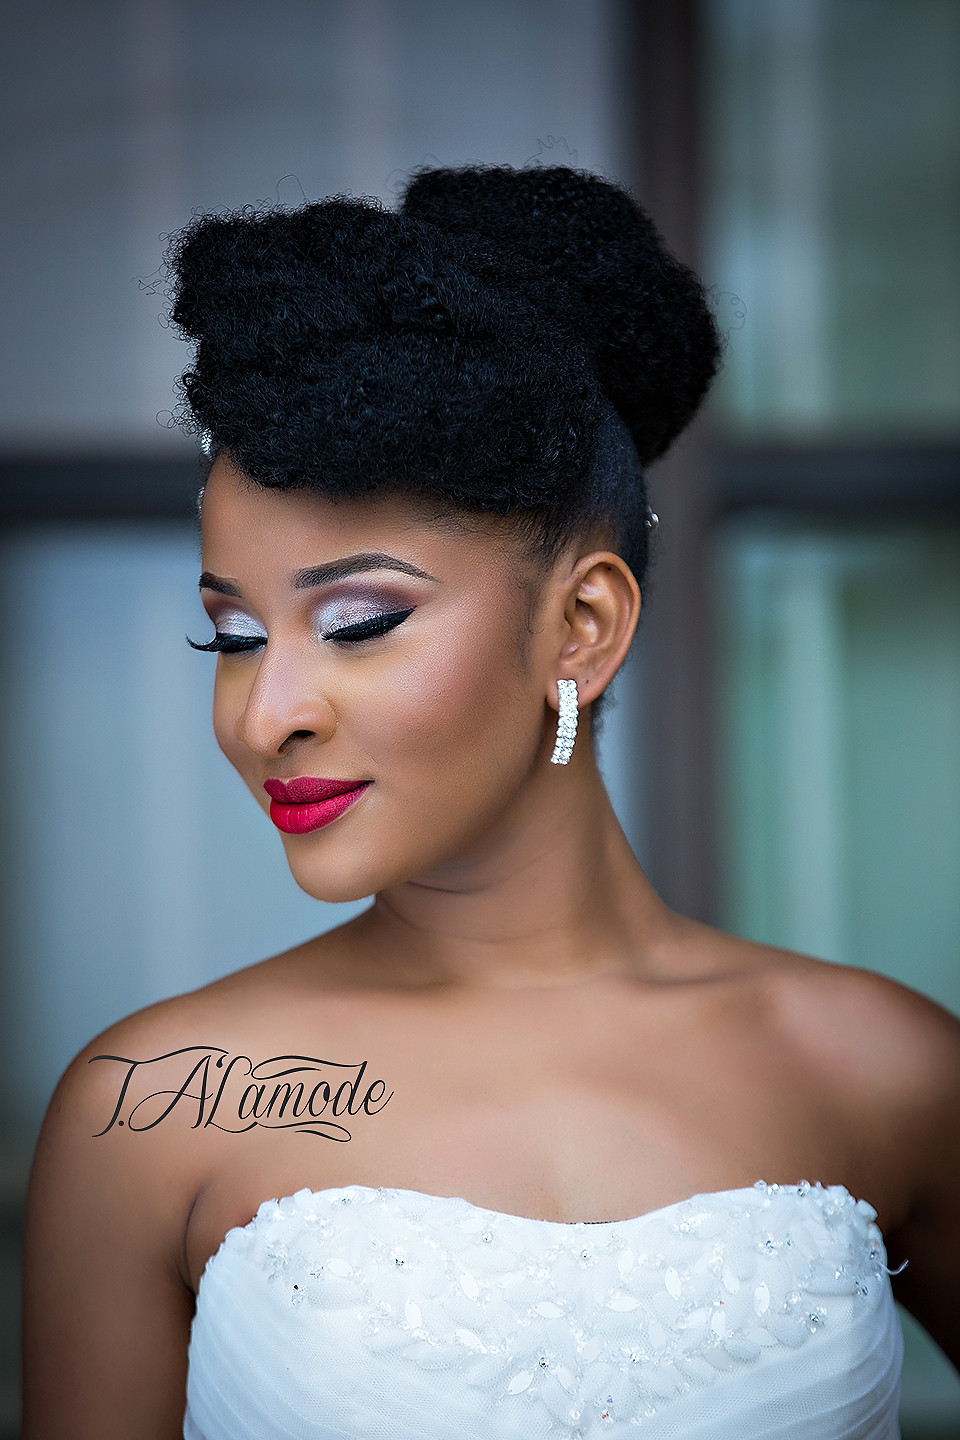 Wedding Hairstyle For Black Brides
 Striking Natural Hair Looks for the 2015 Bride T Alamode